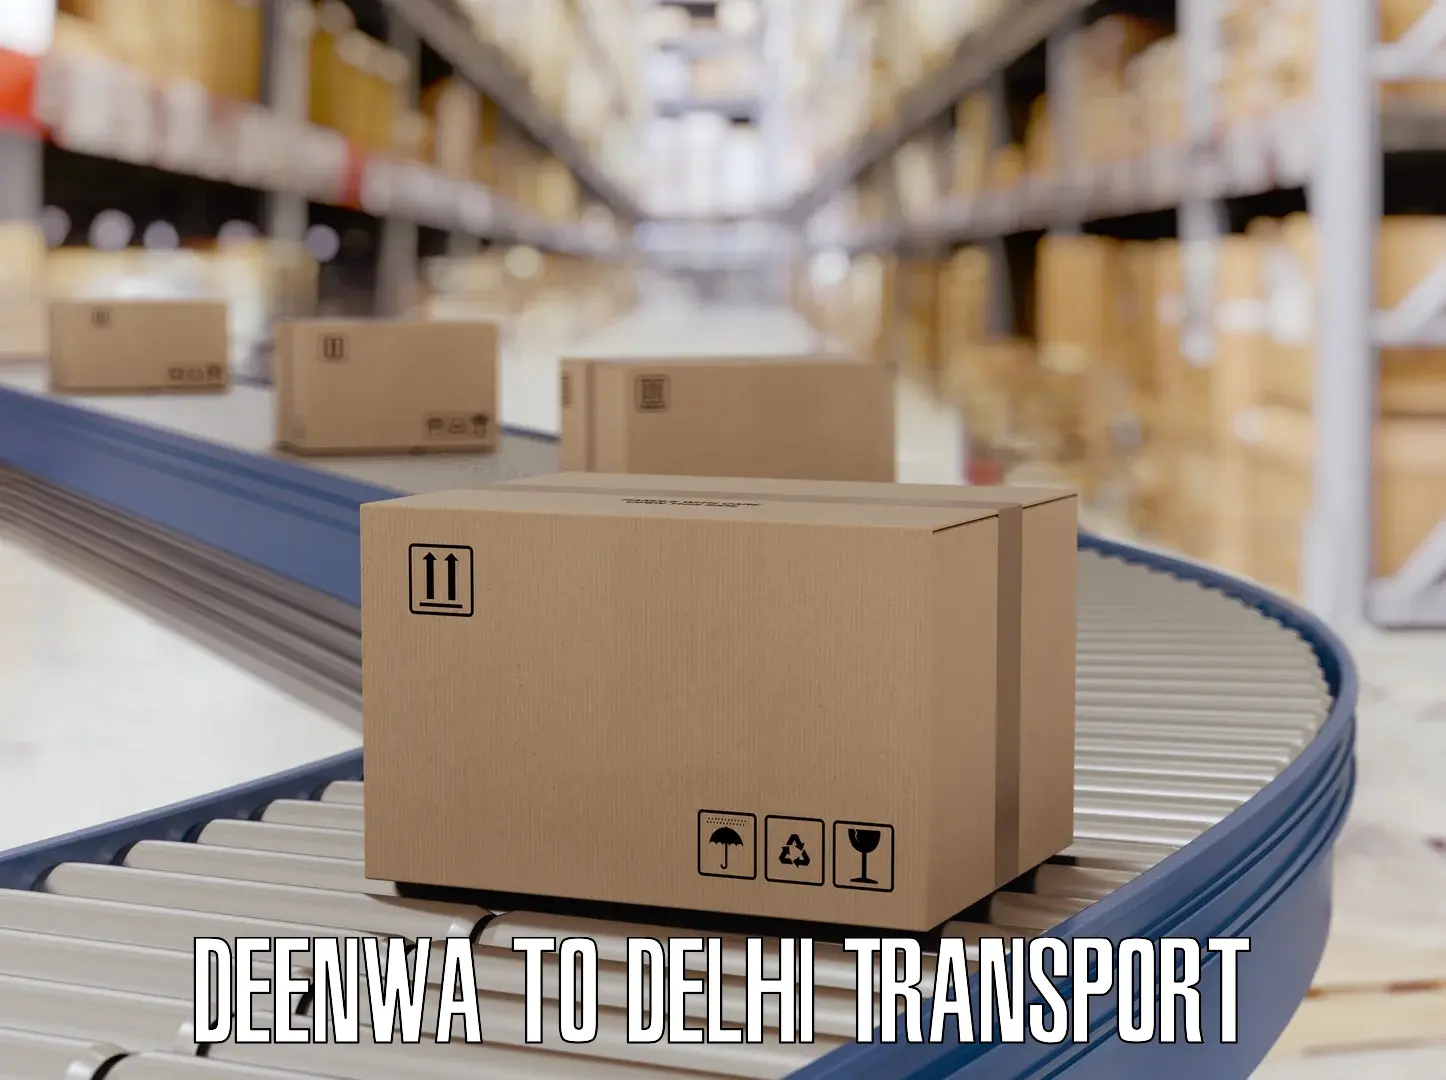 Daily transport service Deenwa to East Delhi